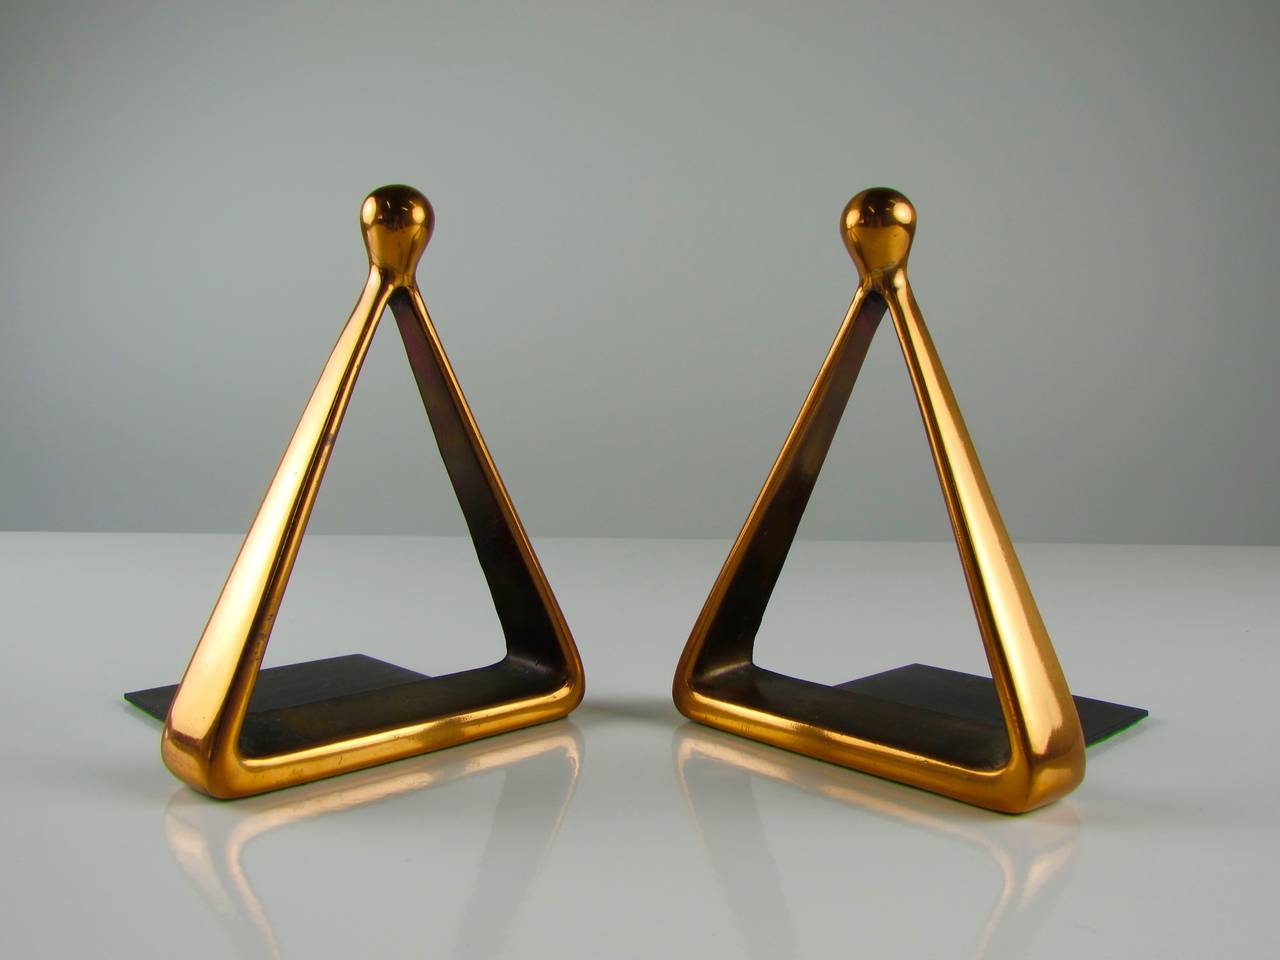 Pristine pair of copper stirrup bookends by Ben Seibel for Jenfred Ware, 1950s. These bookends are both a rare design and in fantastic condition. We've never seen anything from the Jenfred series with such little wear. Truly gorgeous. 

In the